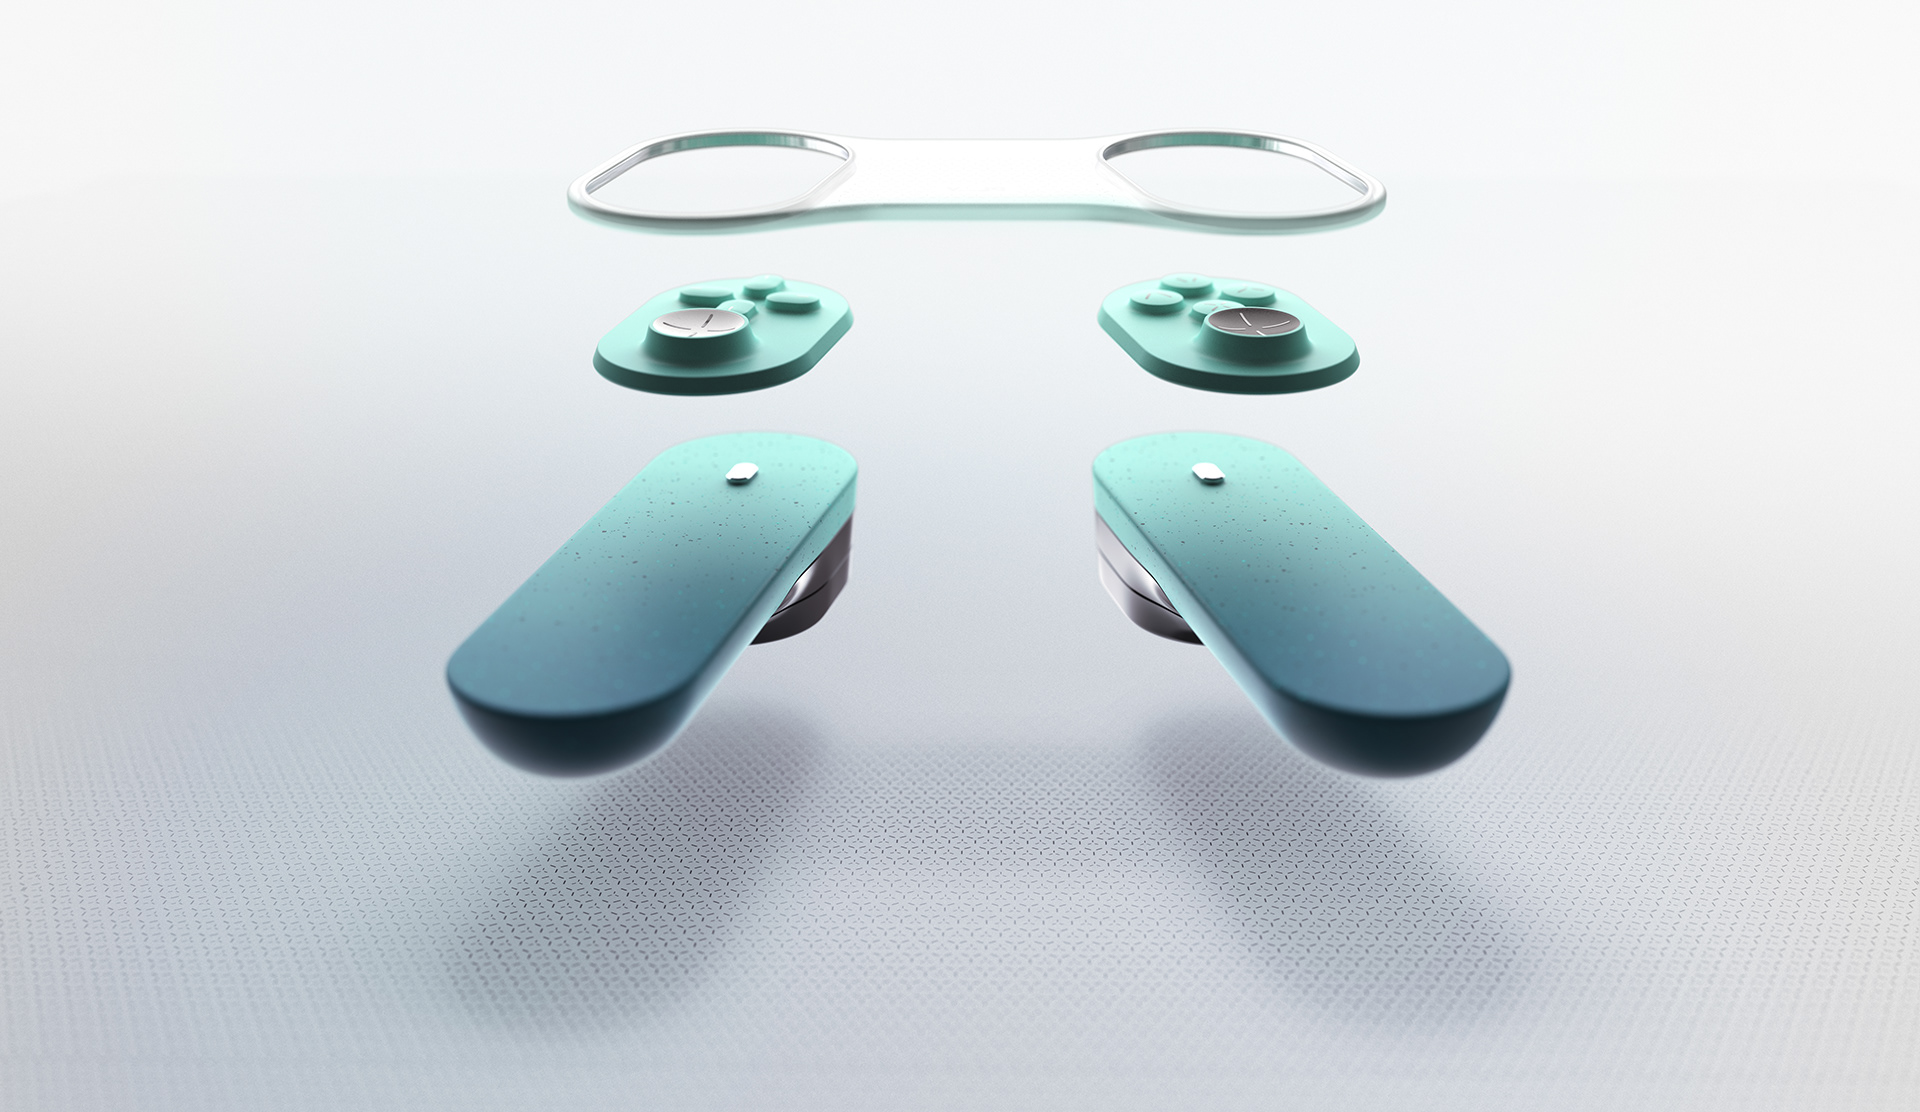 Industrial Design: PLAY, an innovative gaming kit